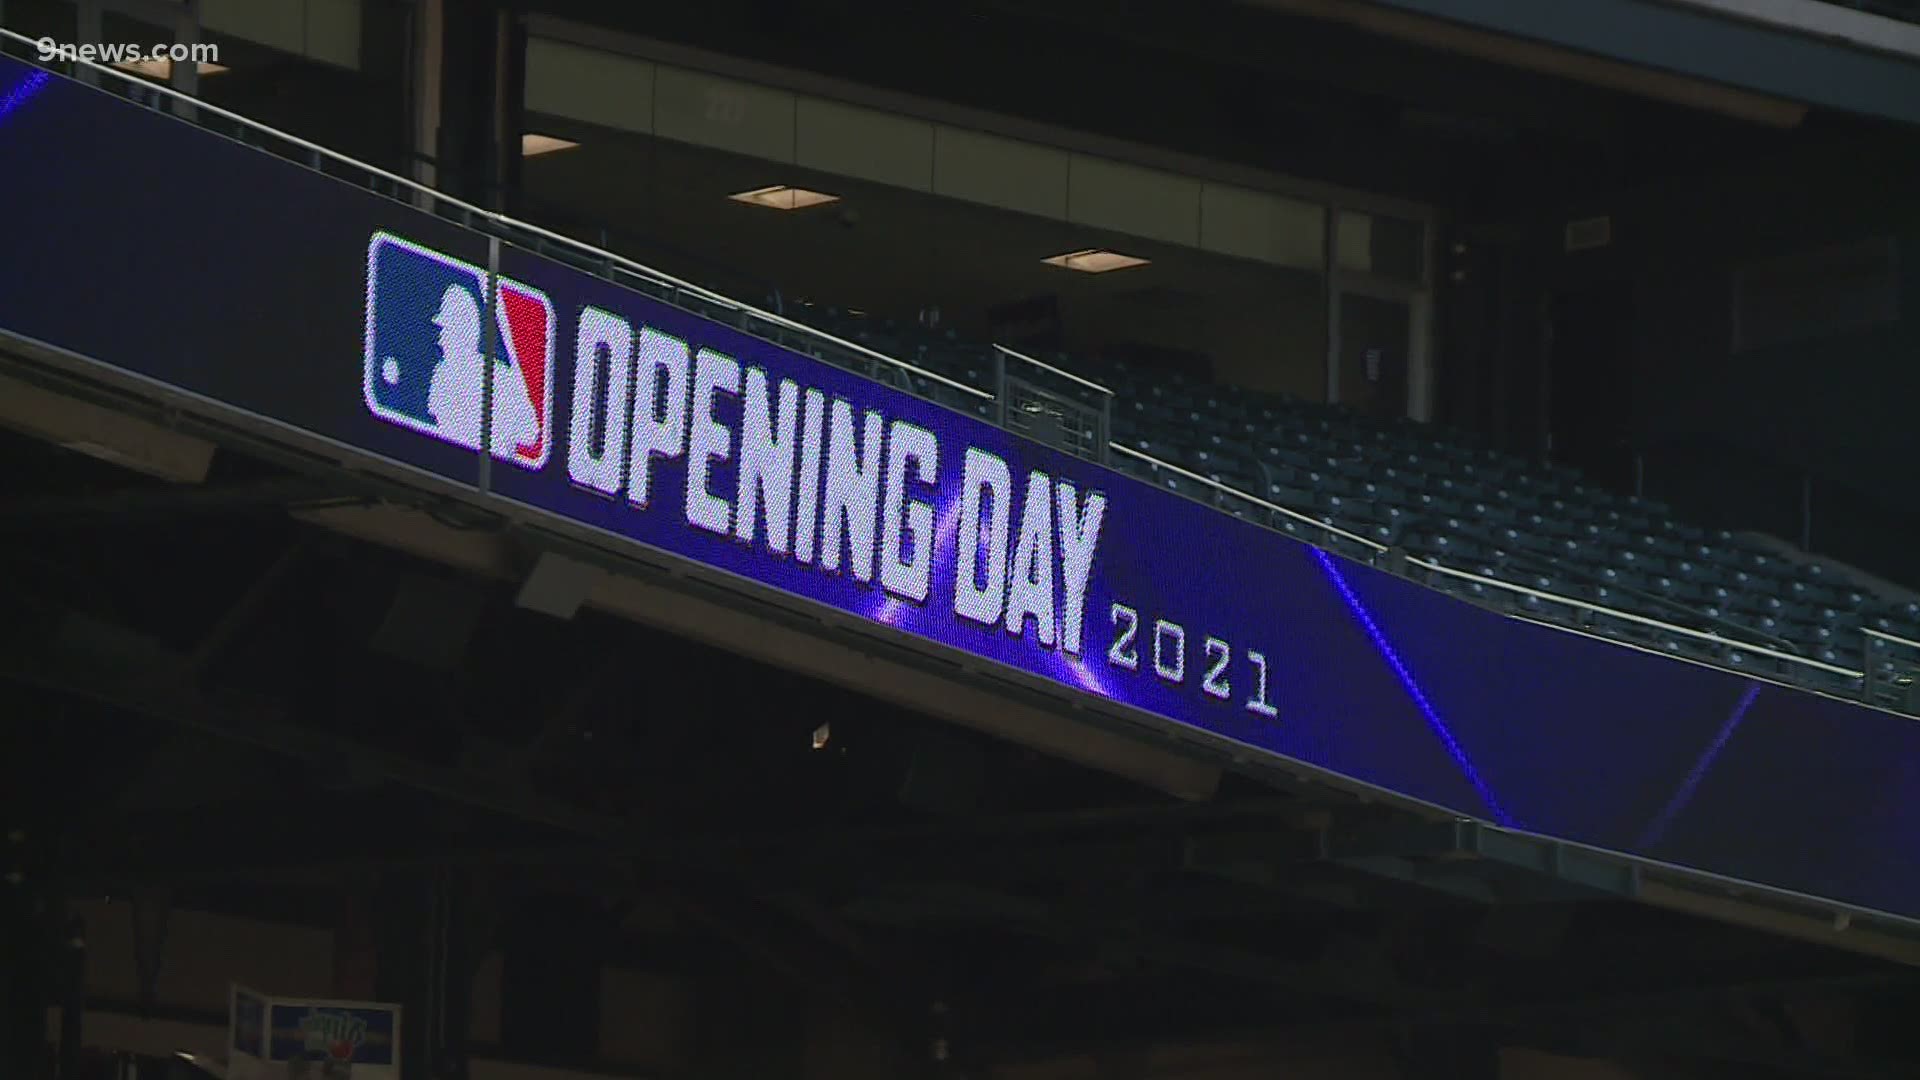 Arielle Orsuto reports live from Coors Field ahead of Colorado Rockies Opening Day 2021.